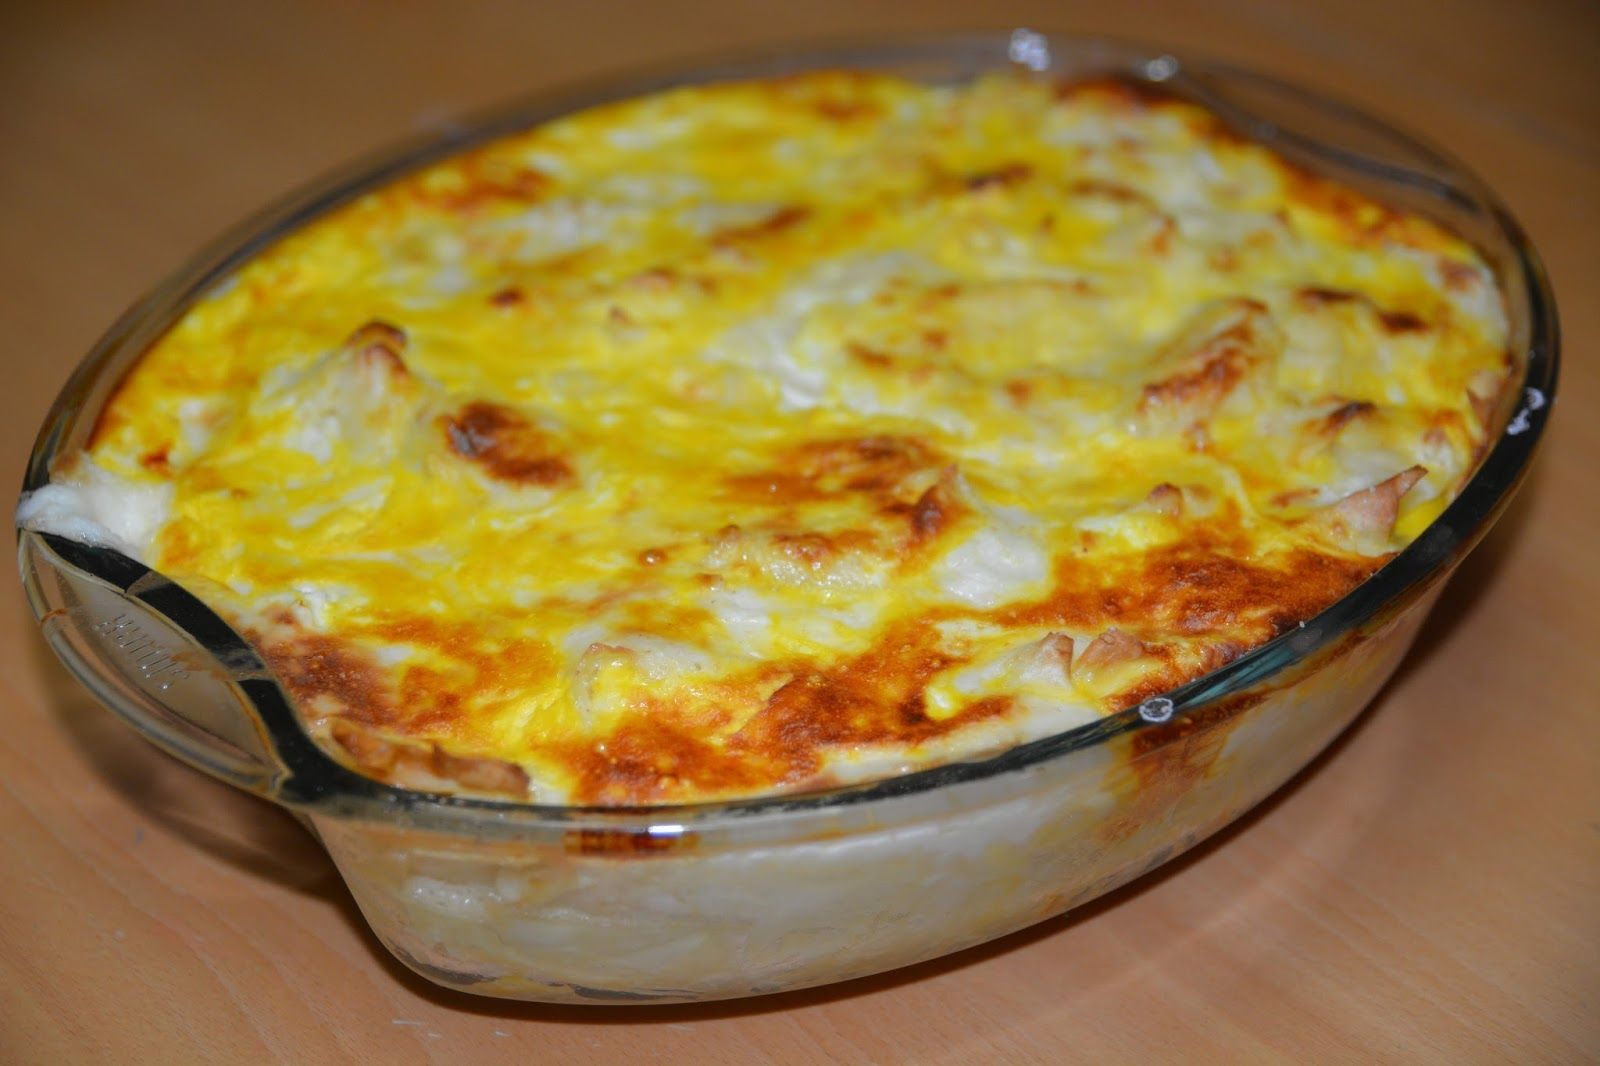 Baked Macaroni And Cheese With Spaghetti Noodles
 BAKED PASTA WITH CHEESE EGGS AND BECHAMEL SAUCE I prepare